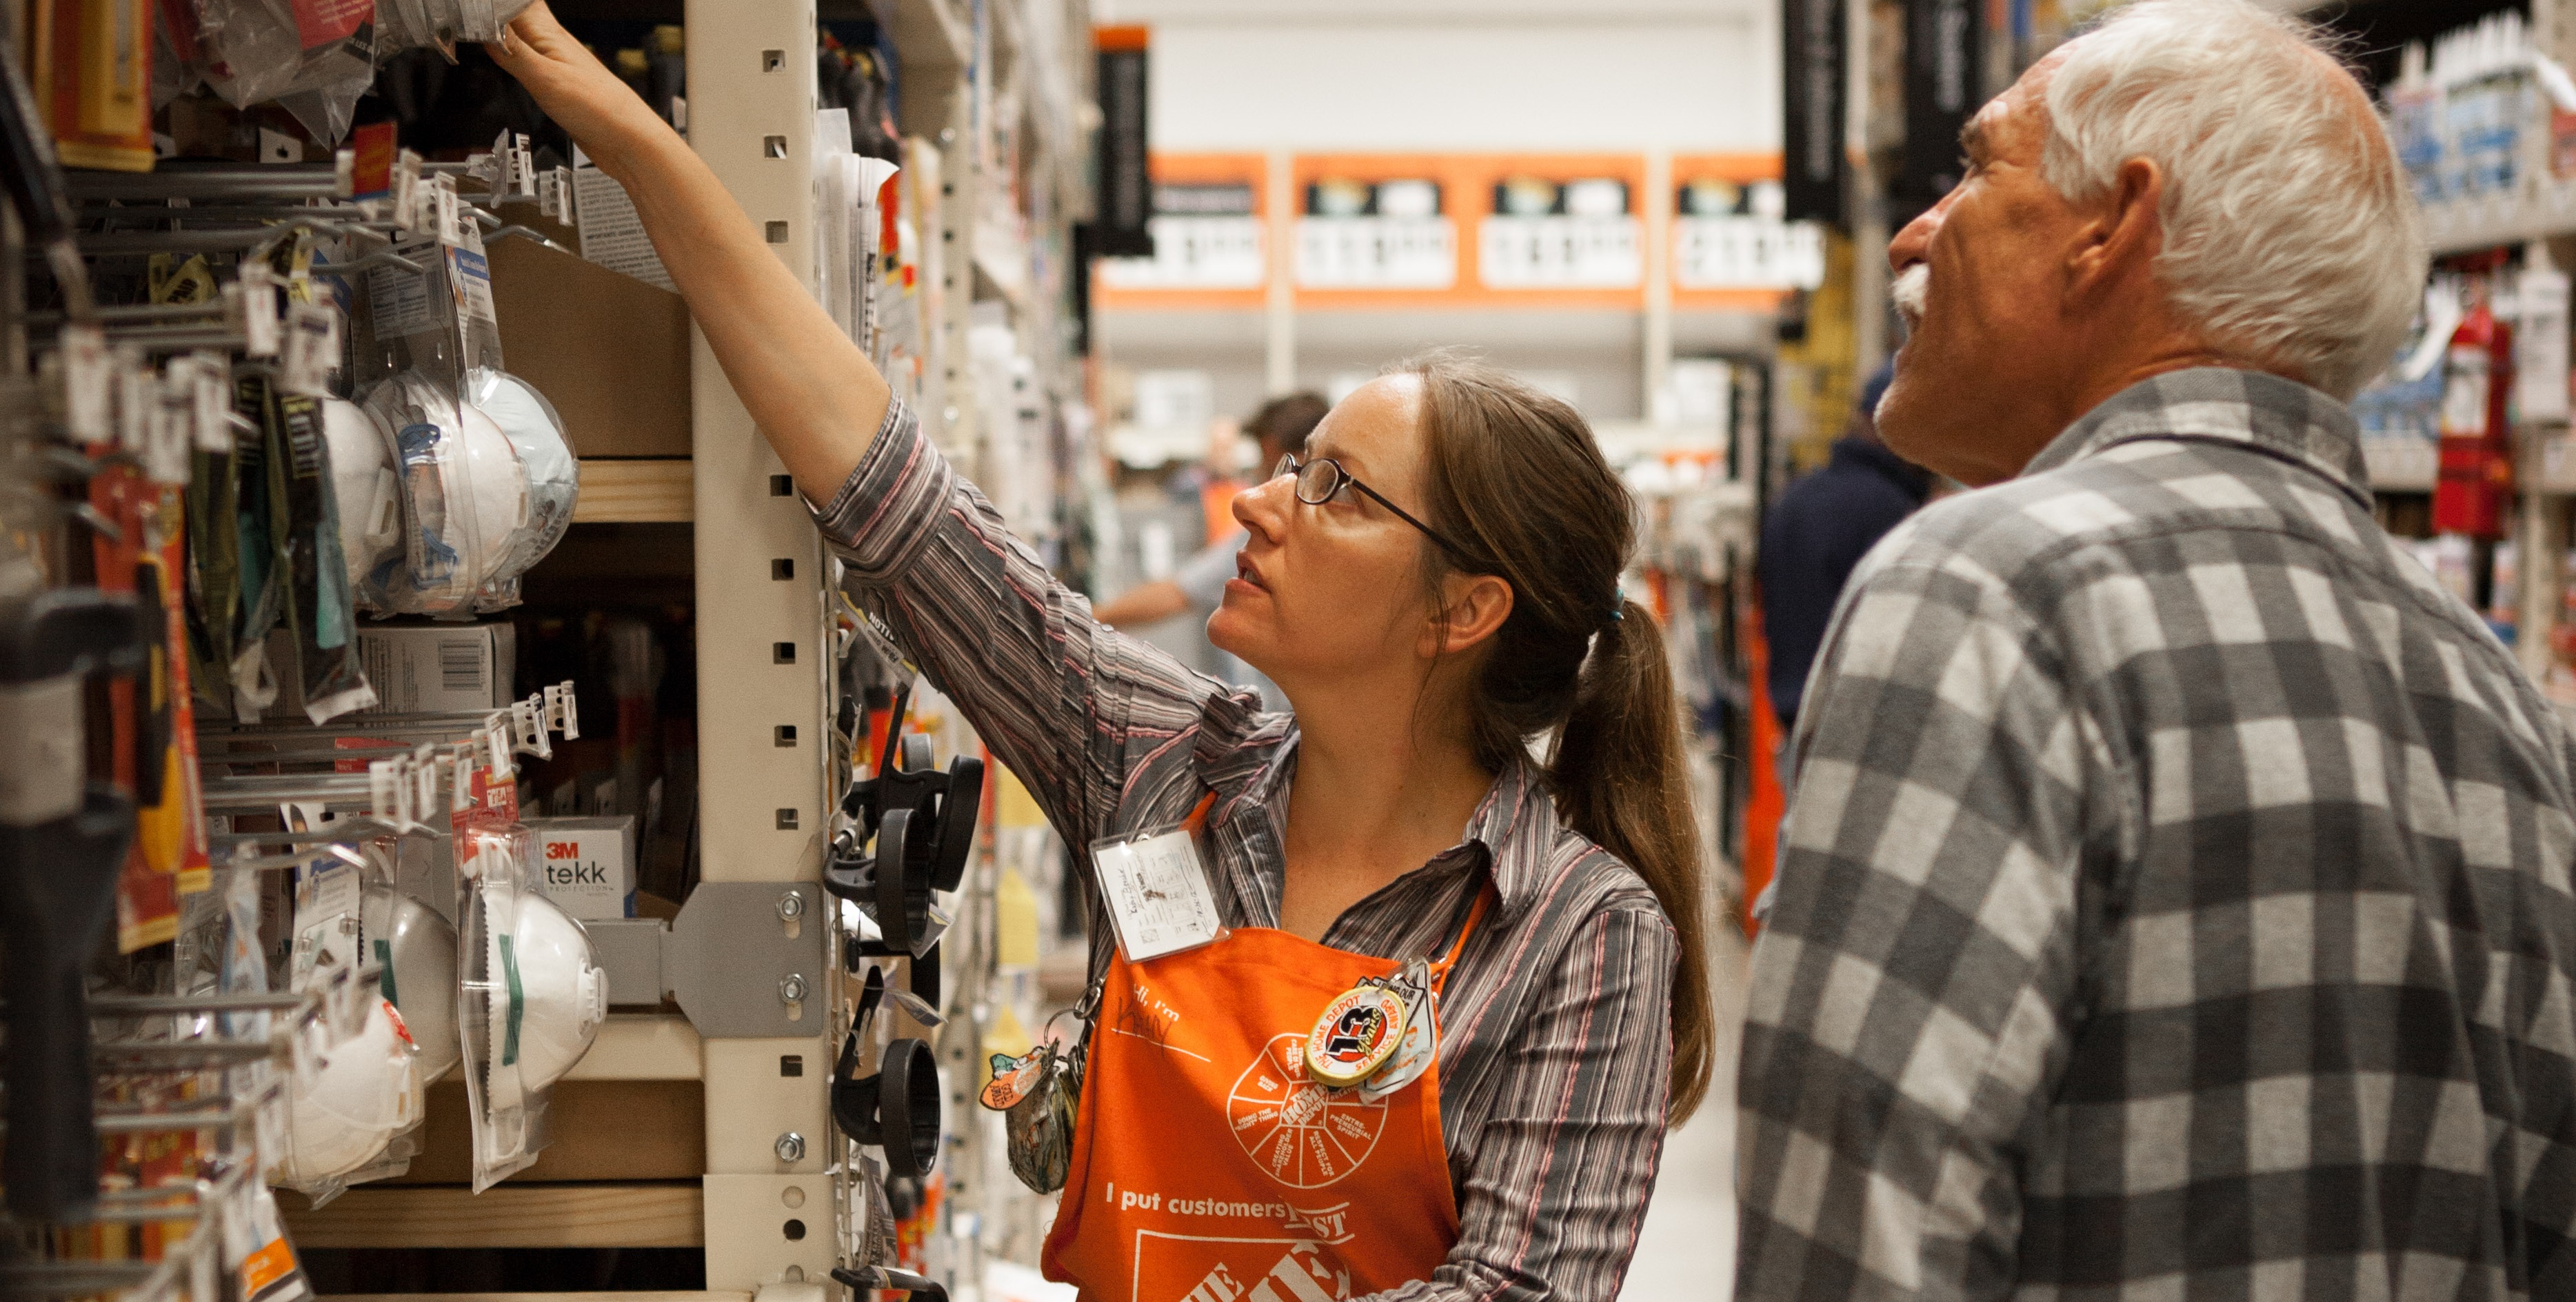 8 Things You May Not Know About Working at Home Depot